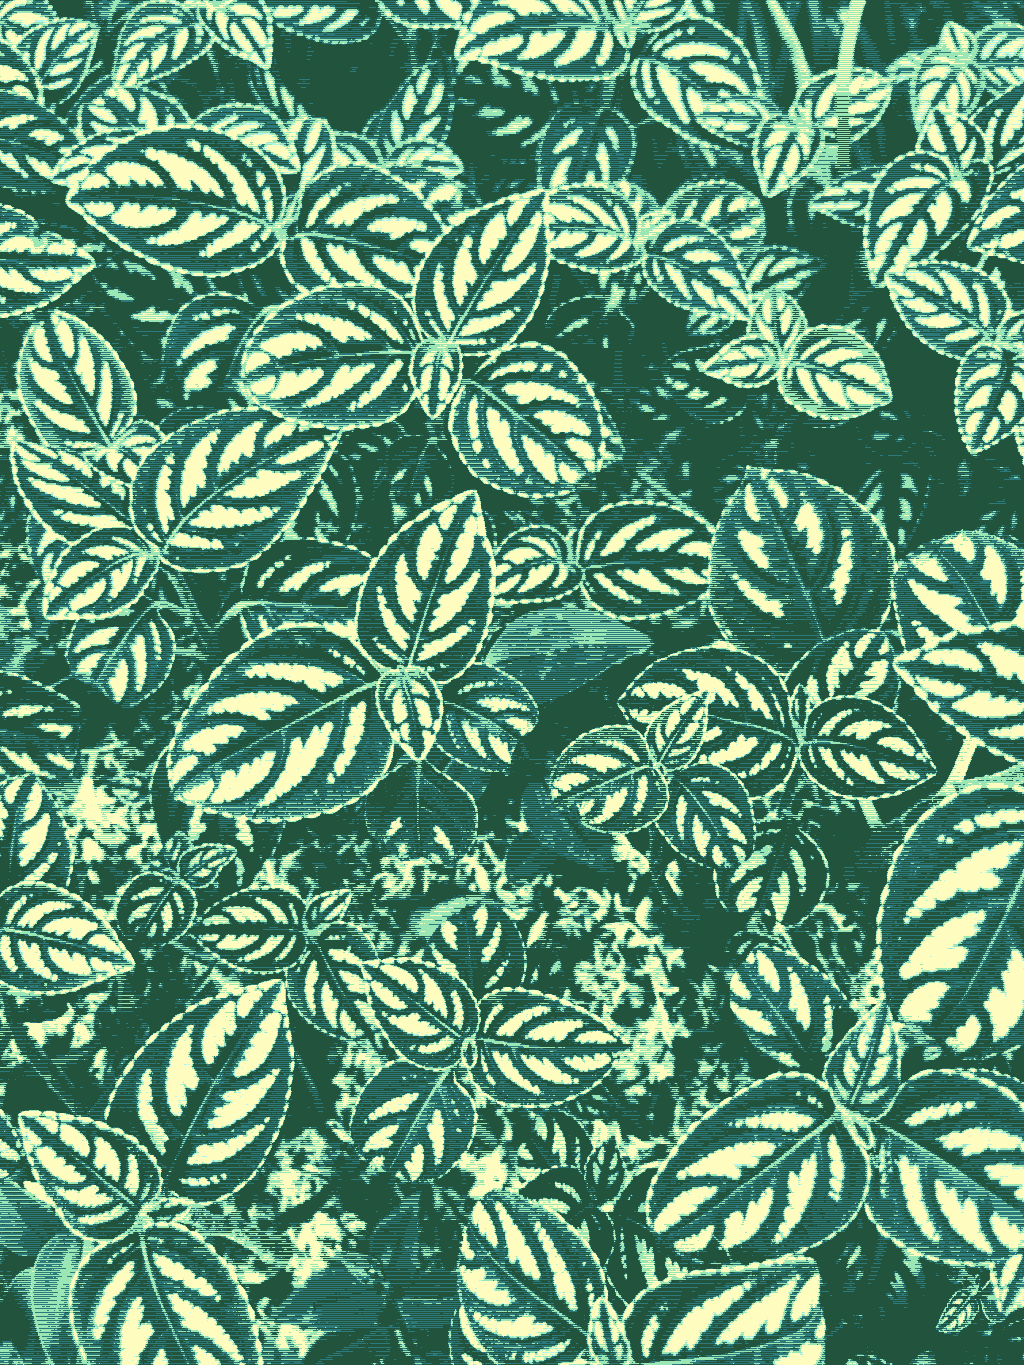 Unidentified leafy ground hugging plant, dithered